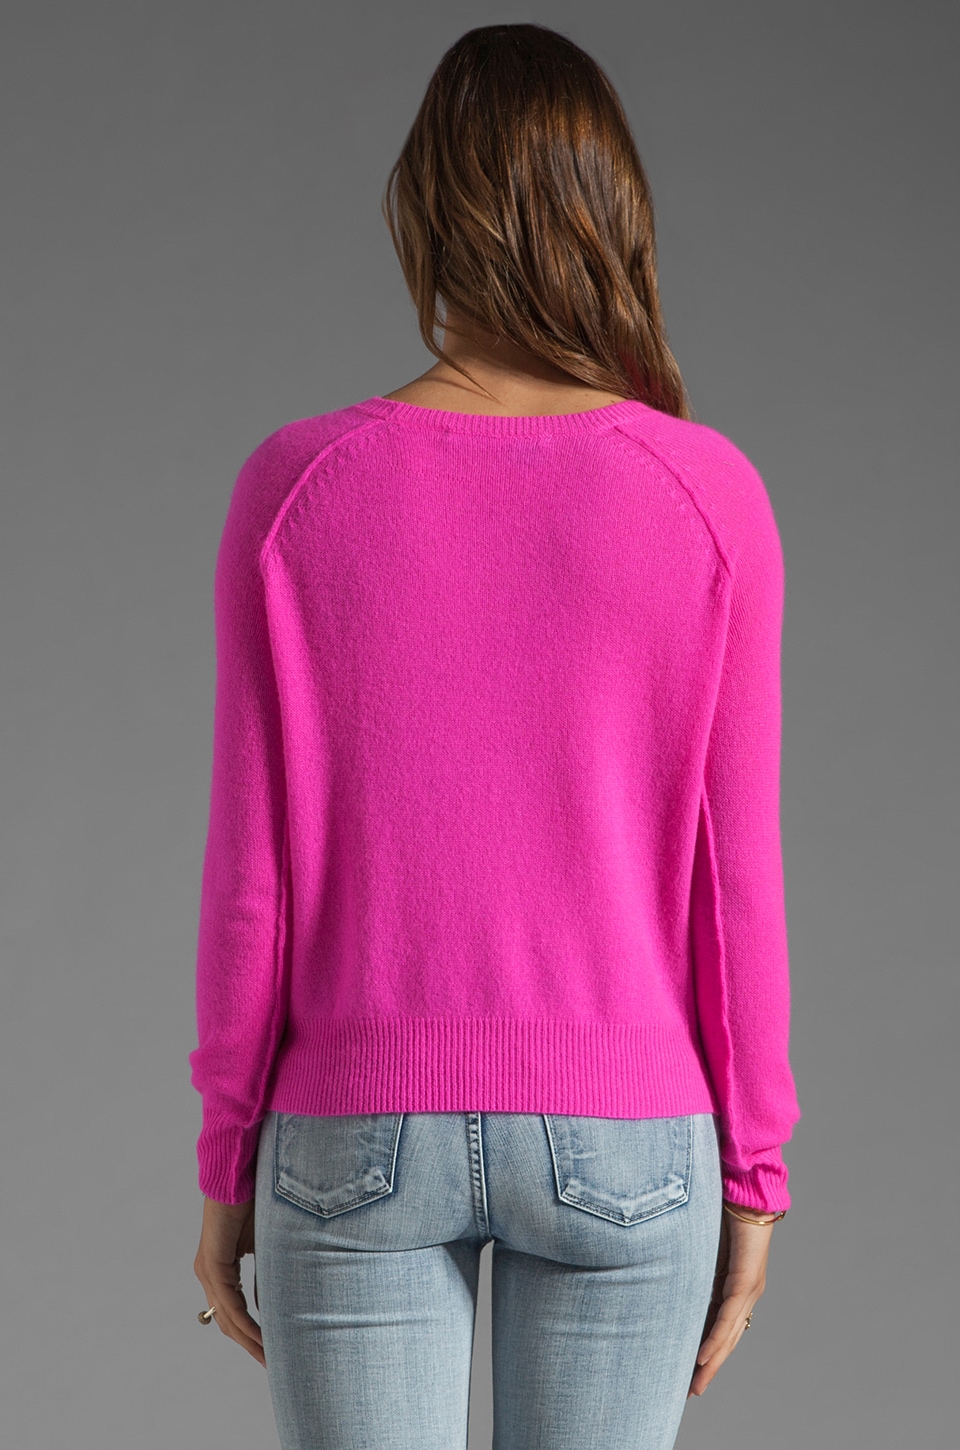 360CASHMERE Charlie Nautical Neon Cashmere Sweater in Pink | REVOLVE